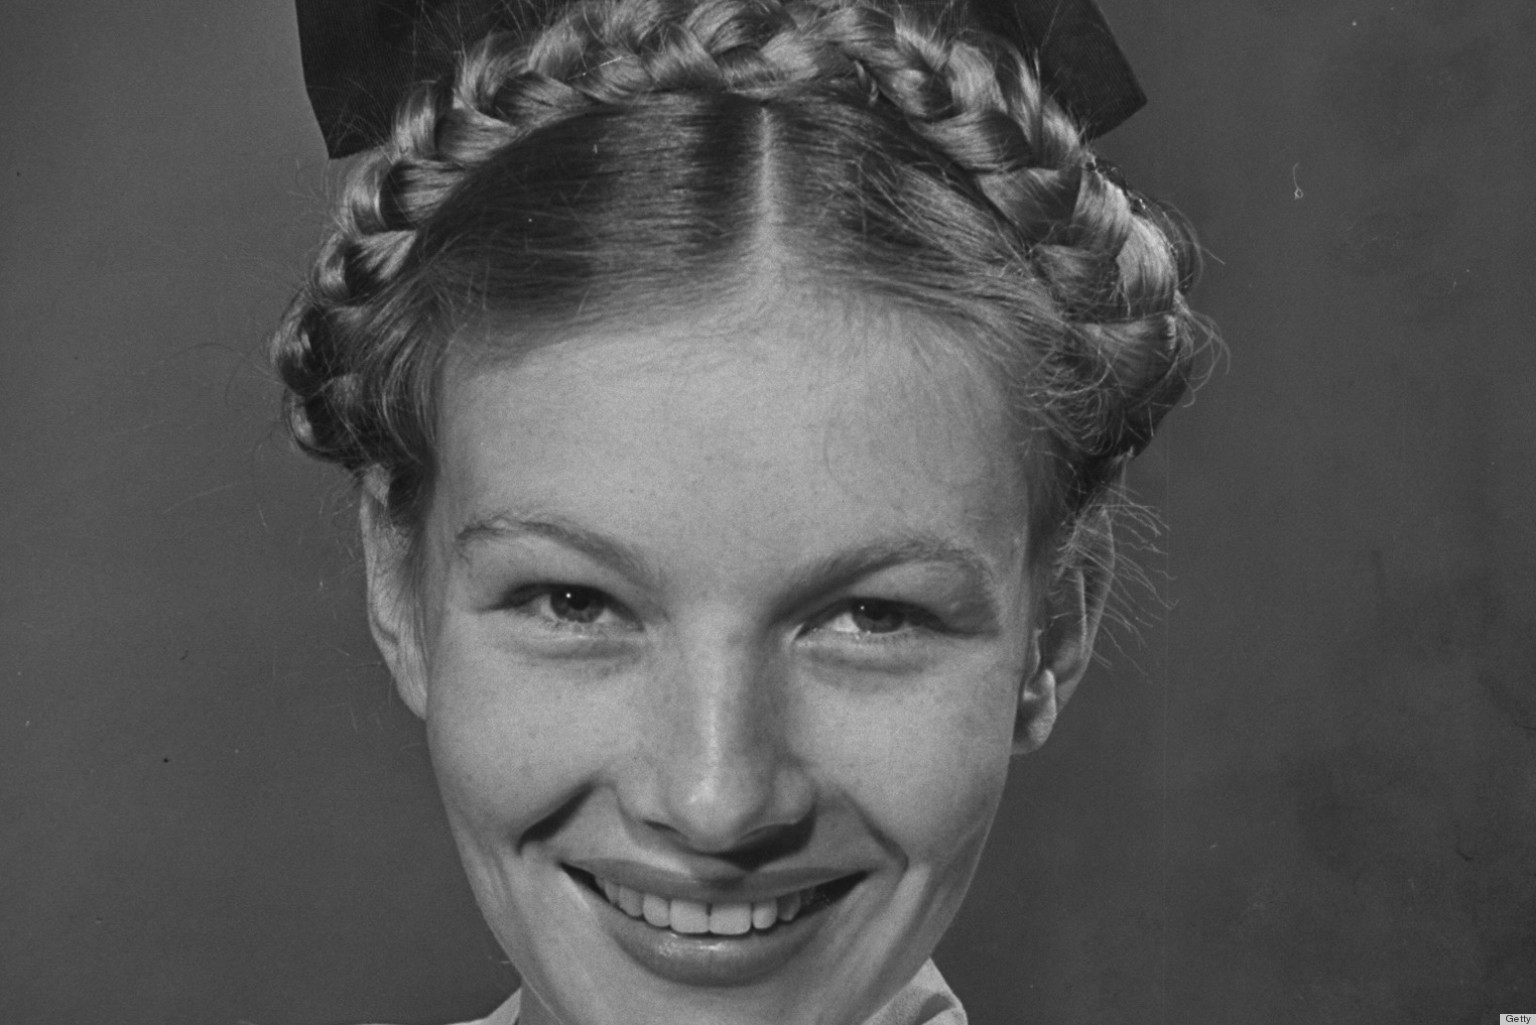 Braids Throughout History: The Highs And Lows Of This ...